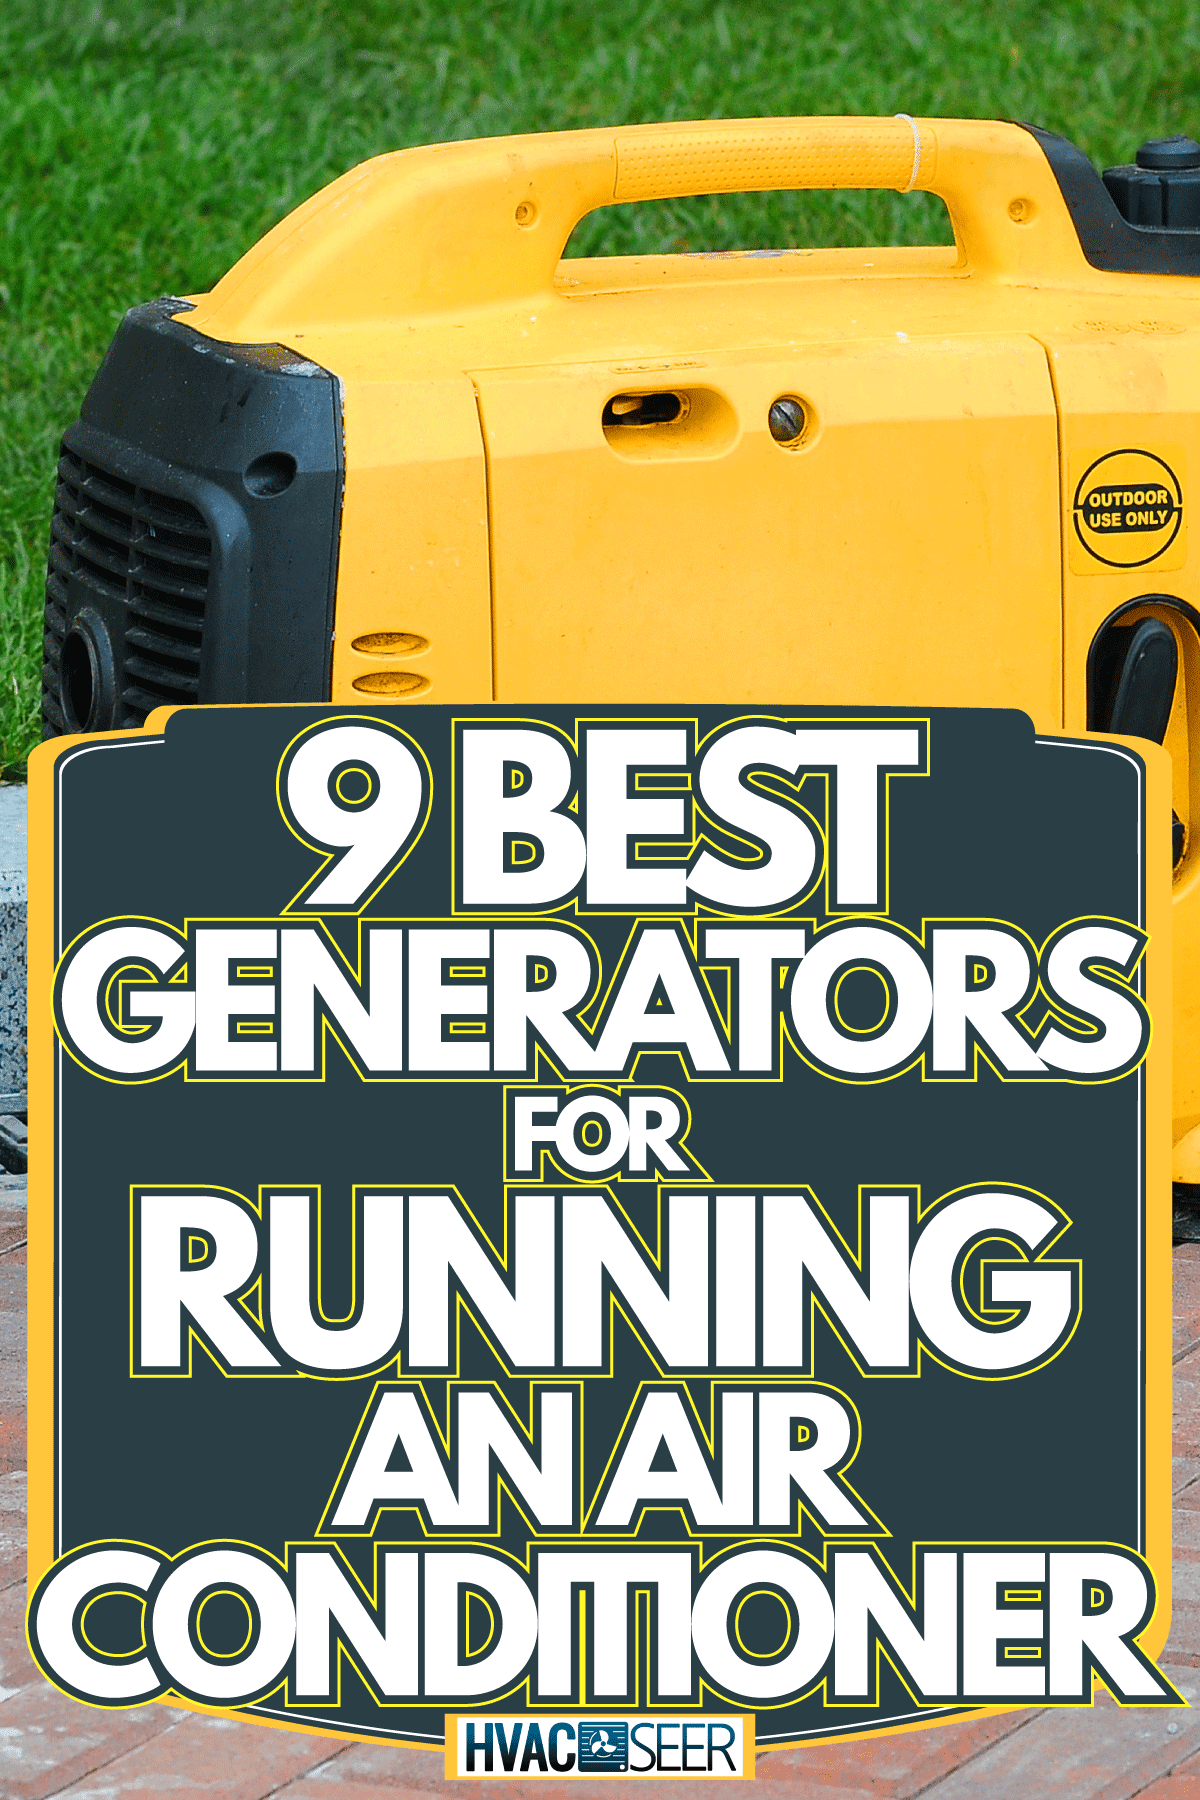 sing portable electric diesel generator on the street, 9 Best Generators For Running An Air Conditioner